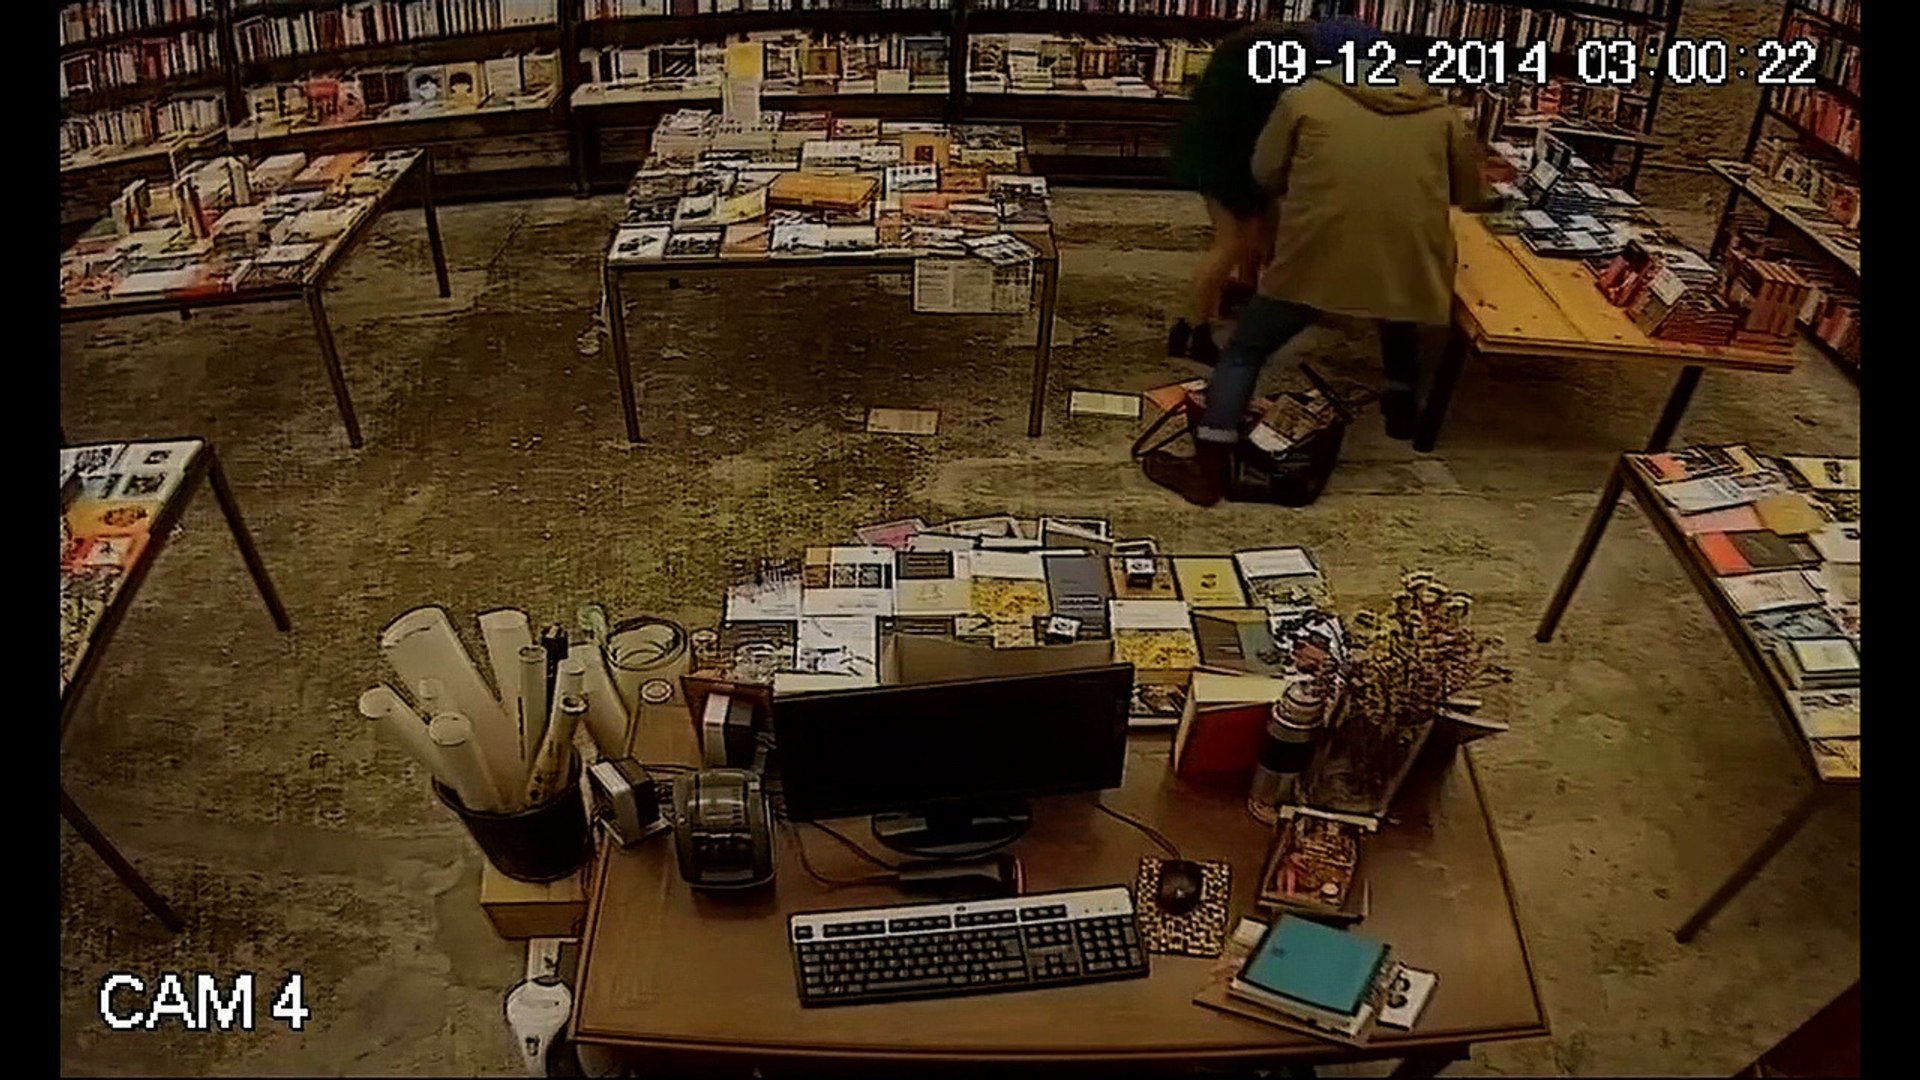 Robbery and theft of a library of books in Barcelona (Spain) - News